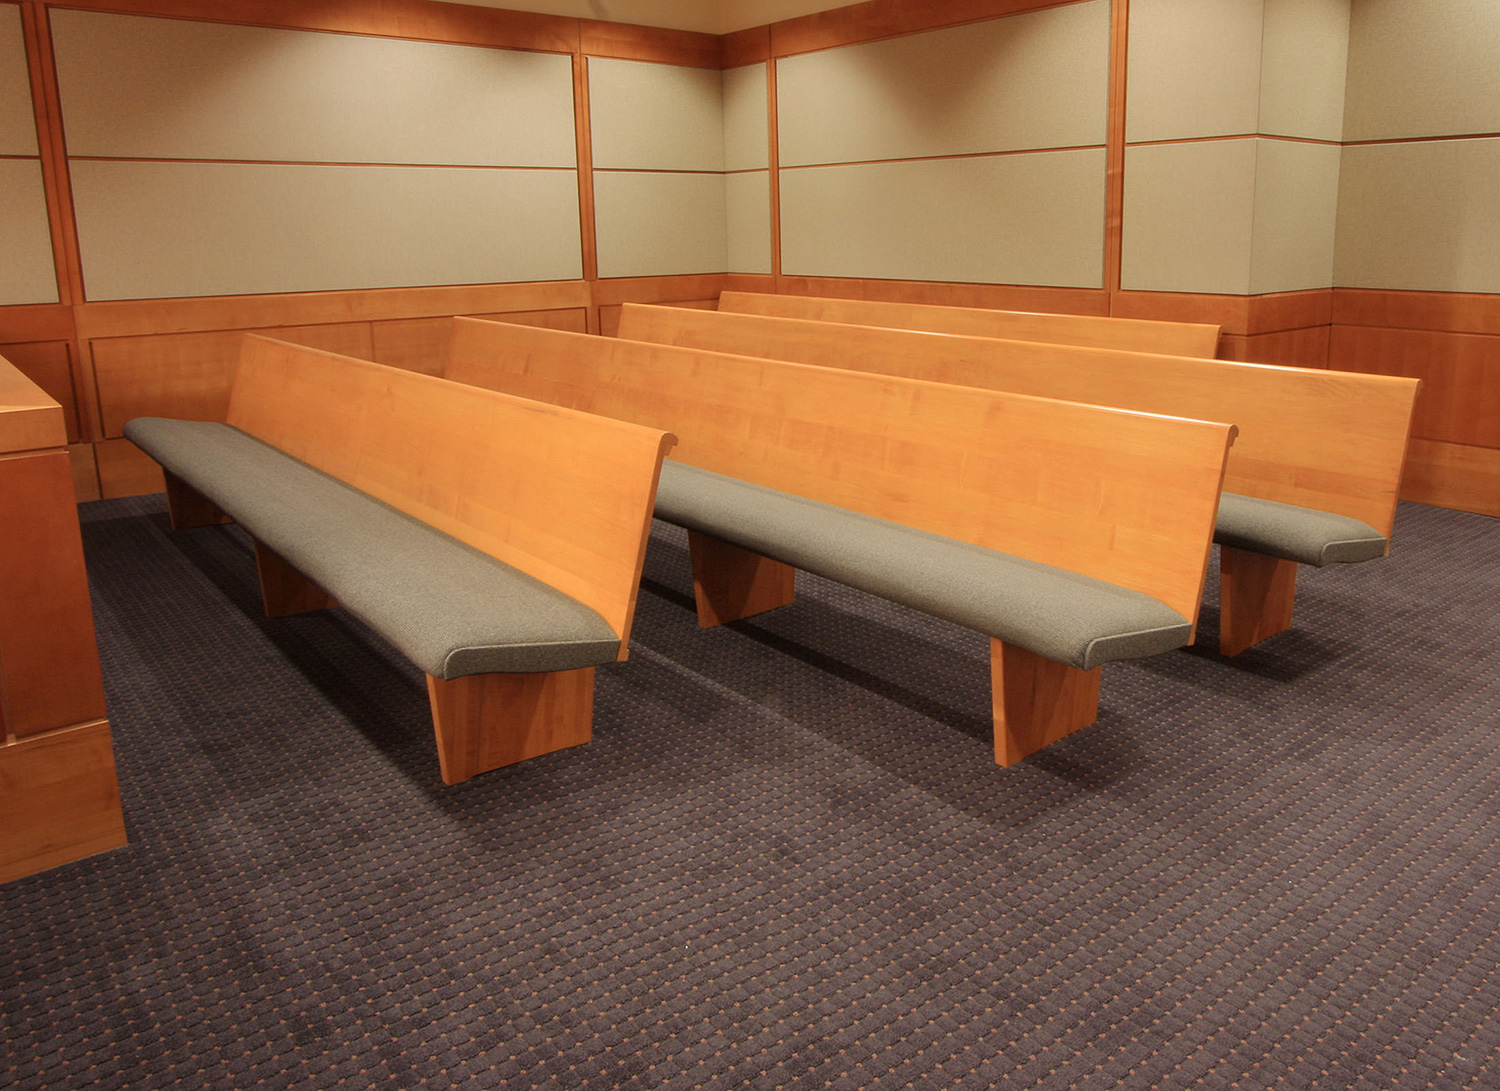 Upholstered Seat and Wood Back Benches in Routt County Courts - Steamboat Springs, CO